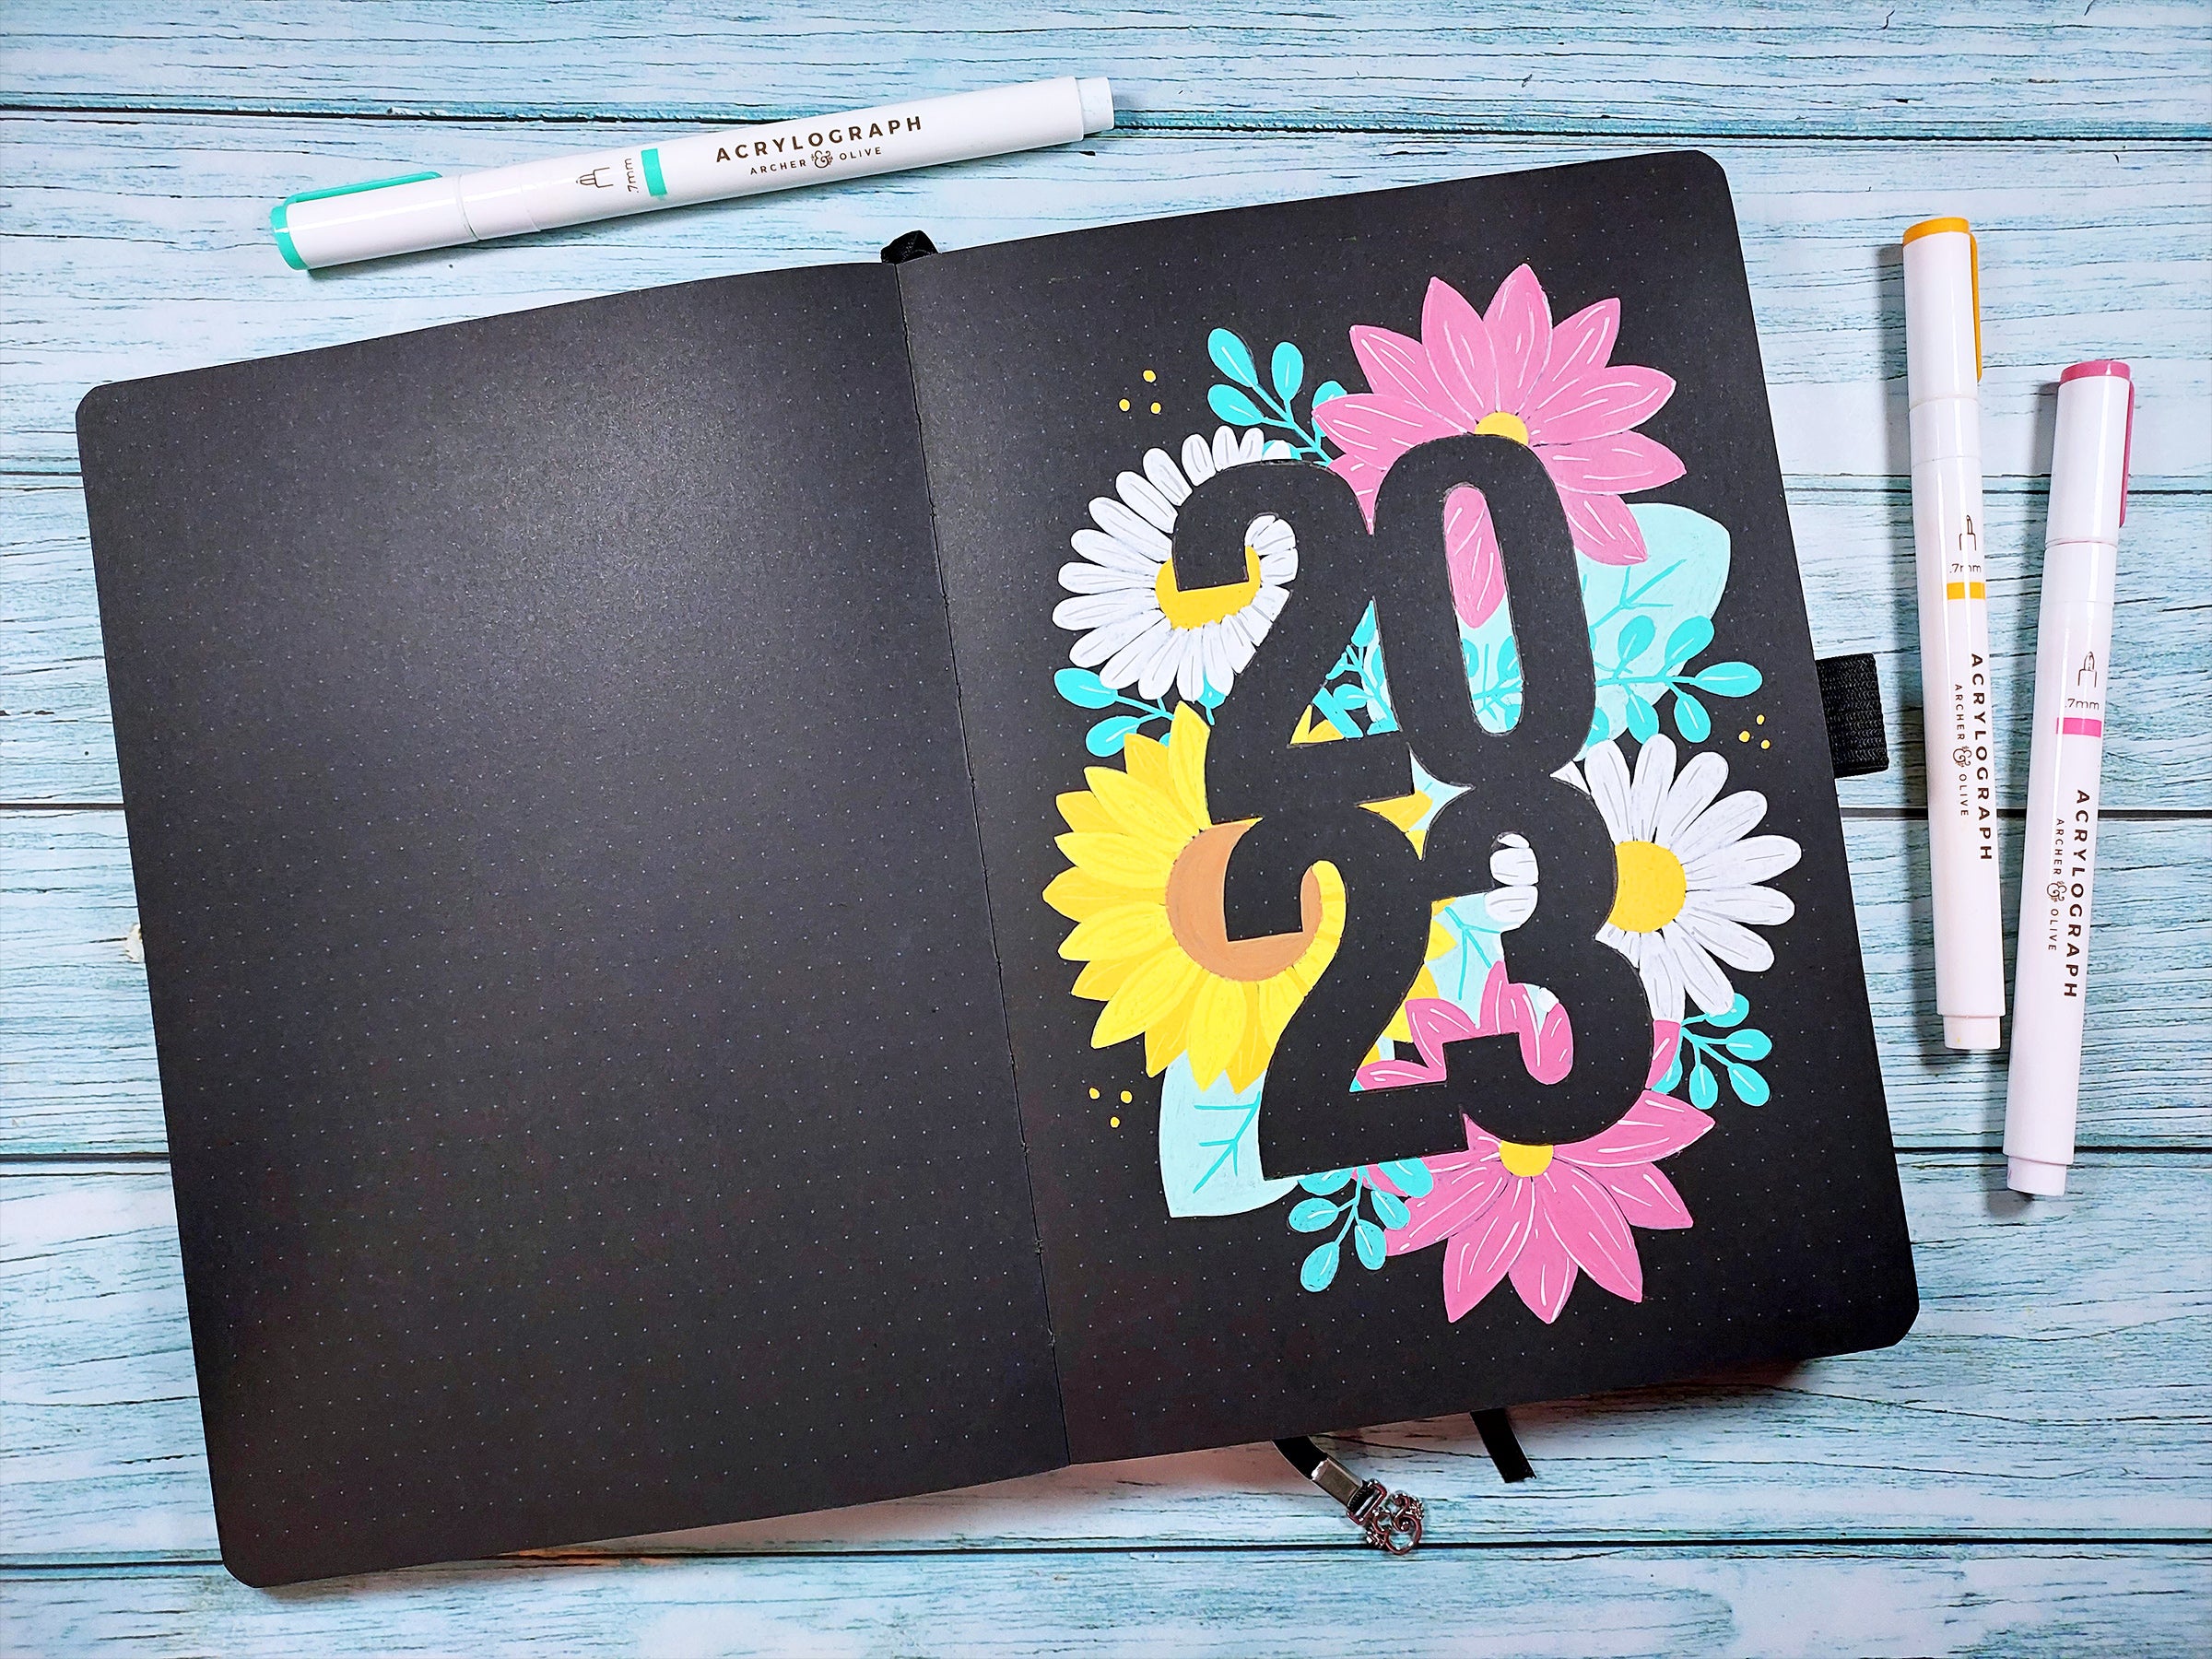 2023 BULLET JOURNAL SUPPLIES + Tips and Tricks 